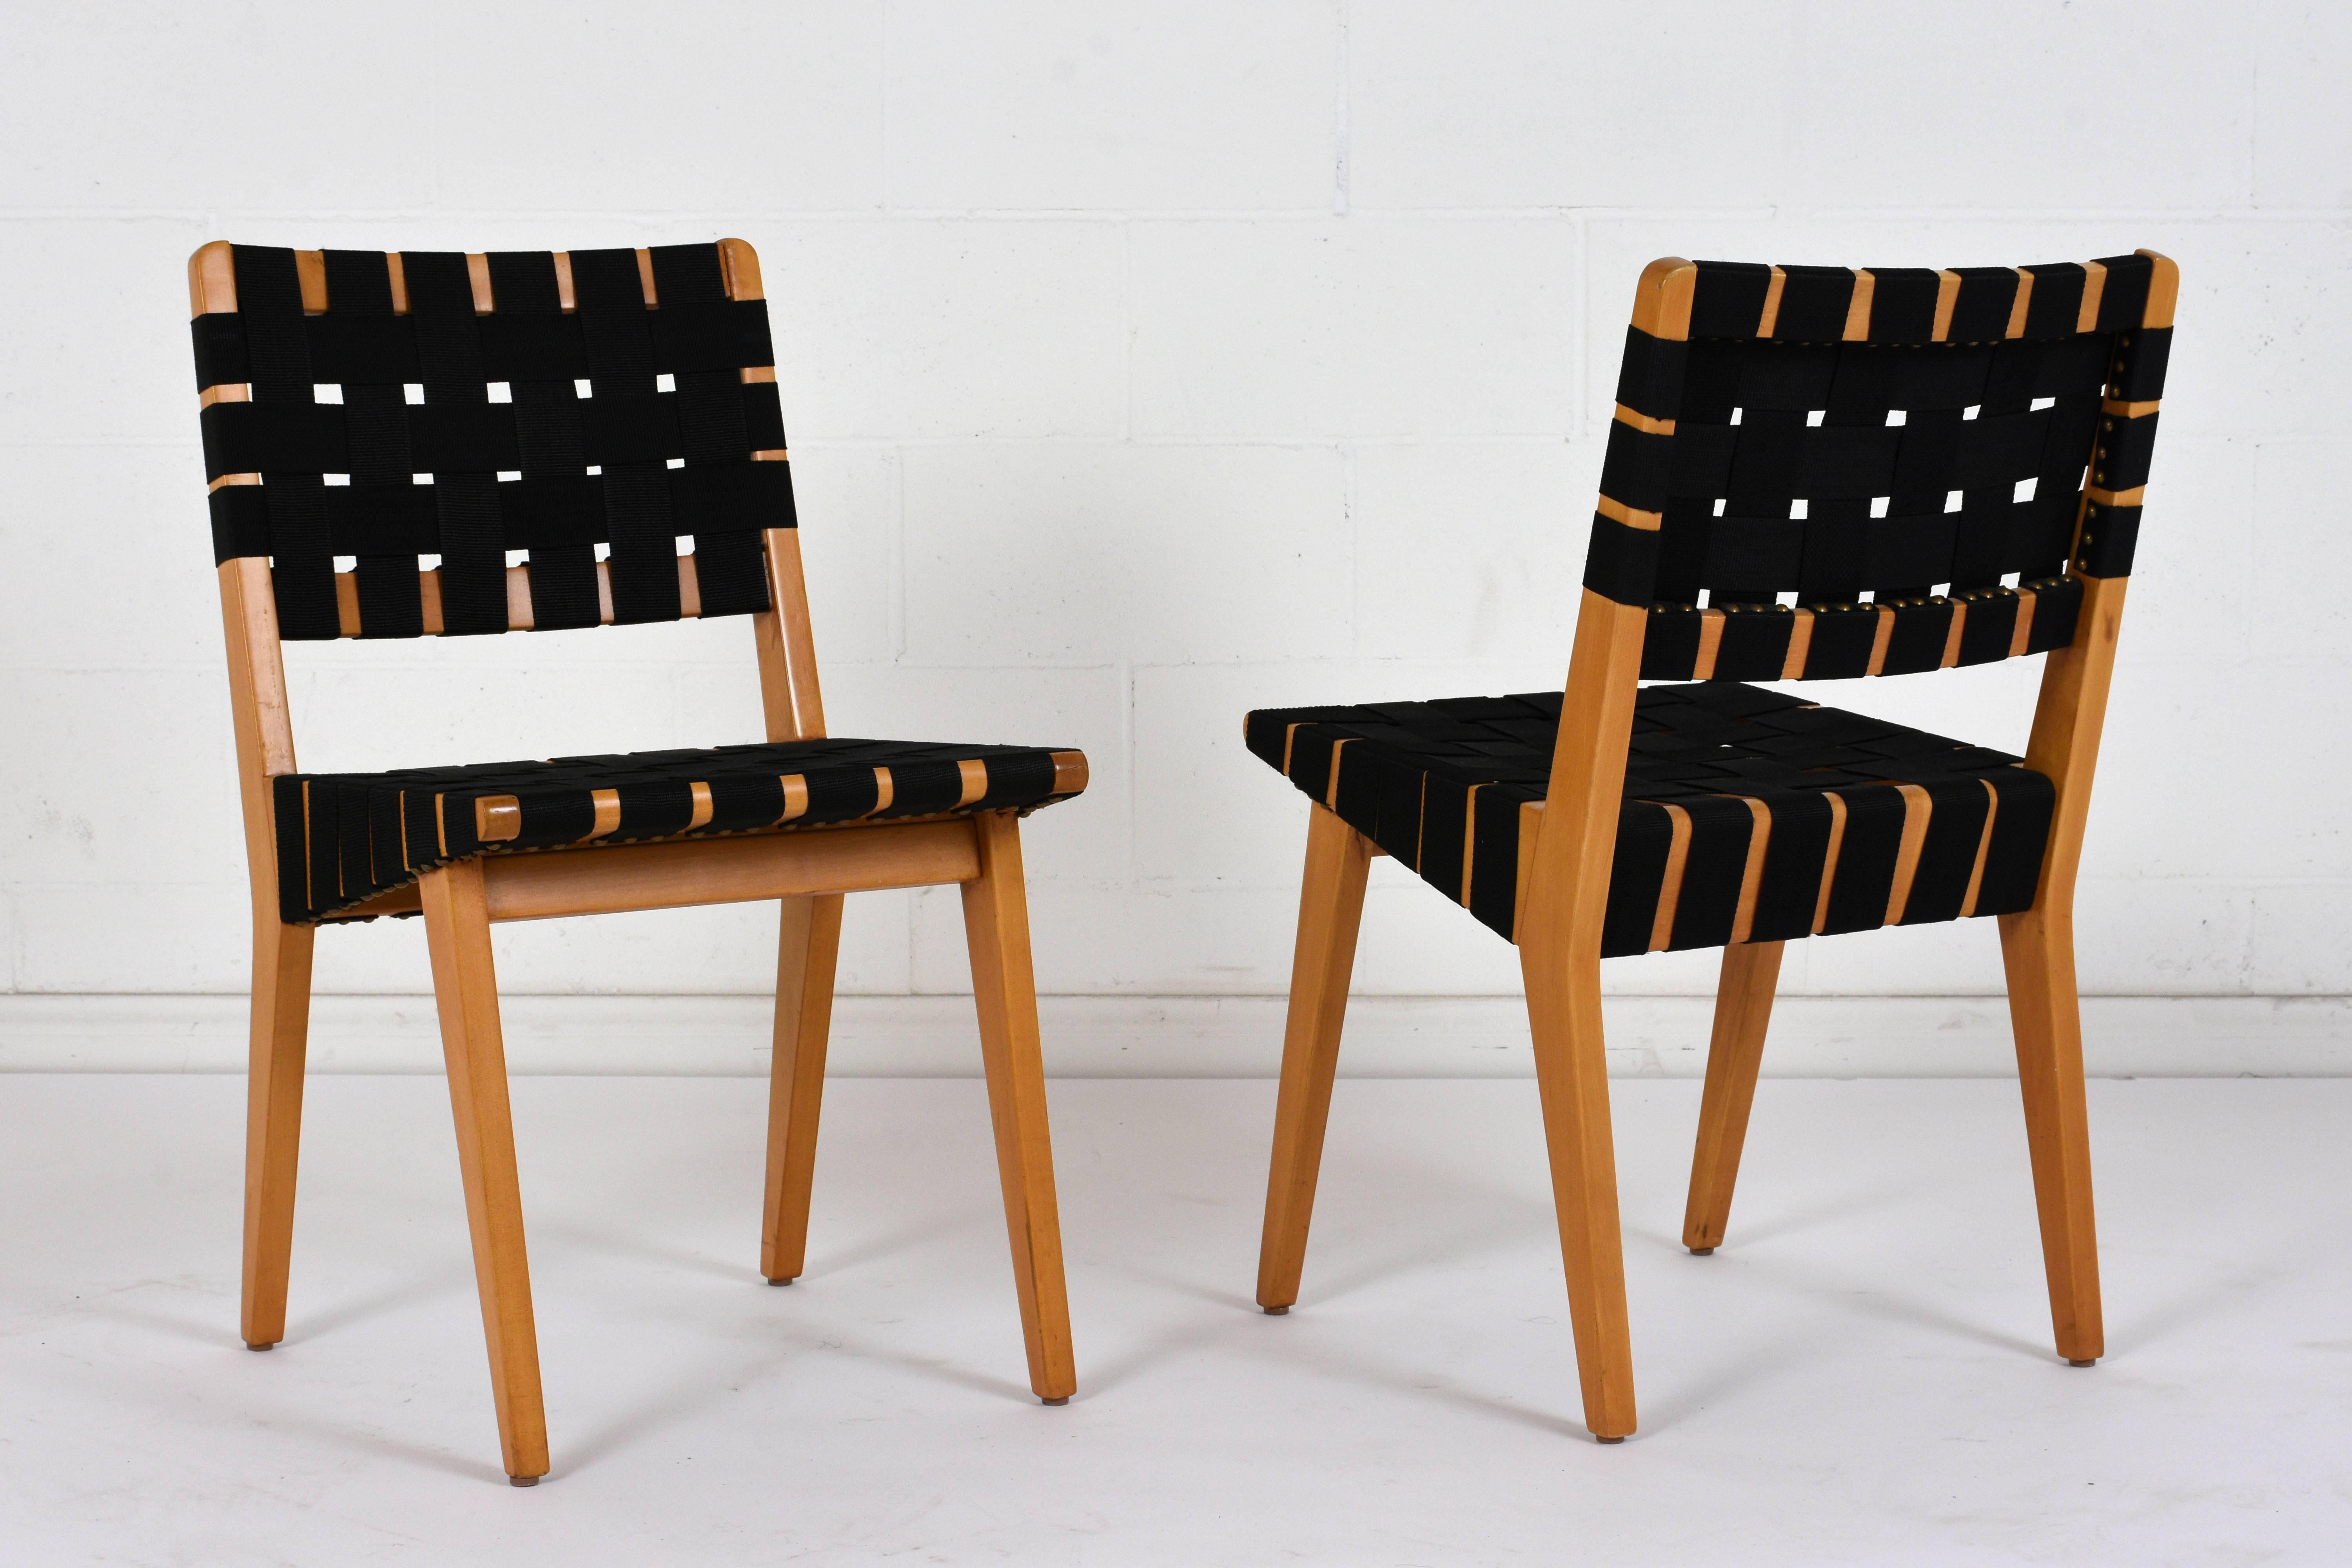 Wood Set of Four Mid-Century Modern Klaus Grabe-Style Dining Chairs